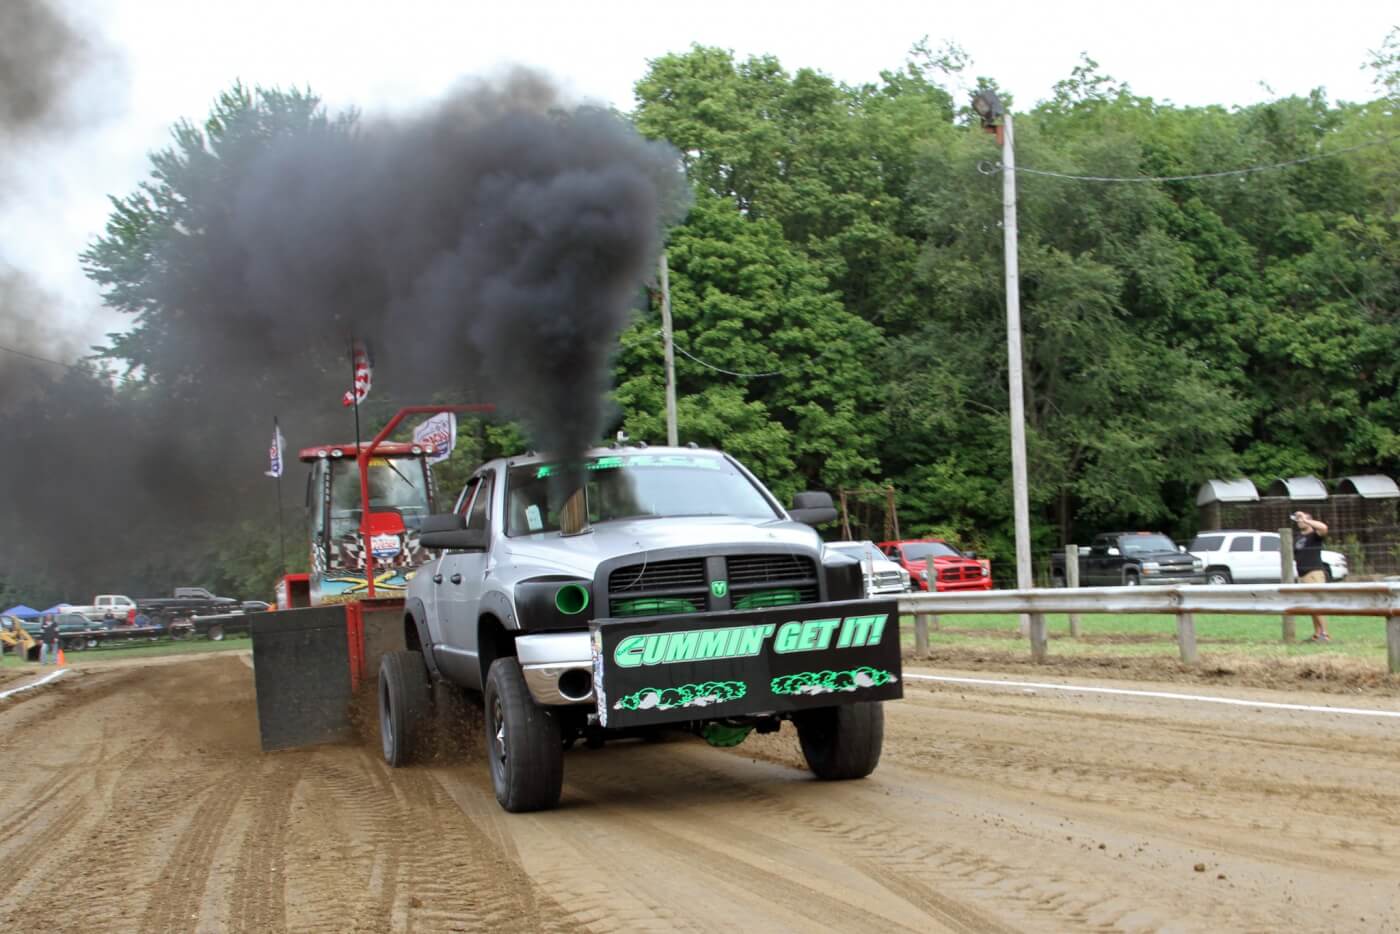 Jordan Kinderman just missed the podium in the Hot Street class with his Dodge, but you can’t miss the neon green accents on the truck.